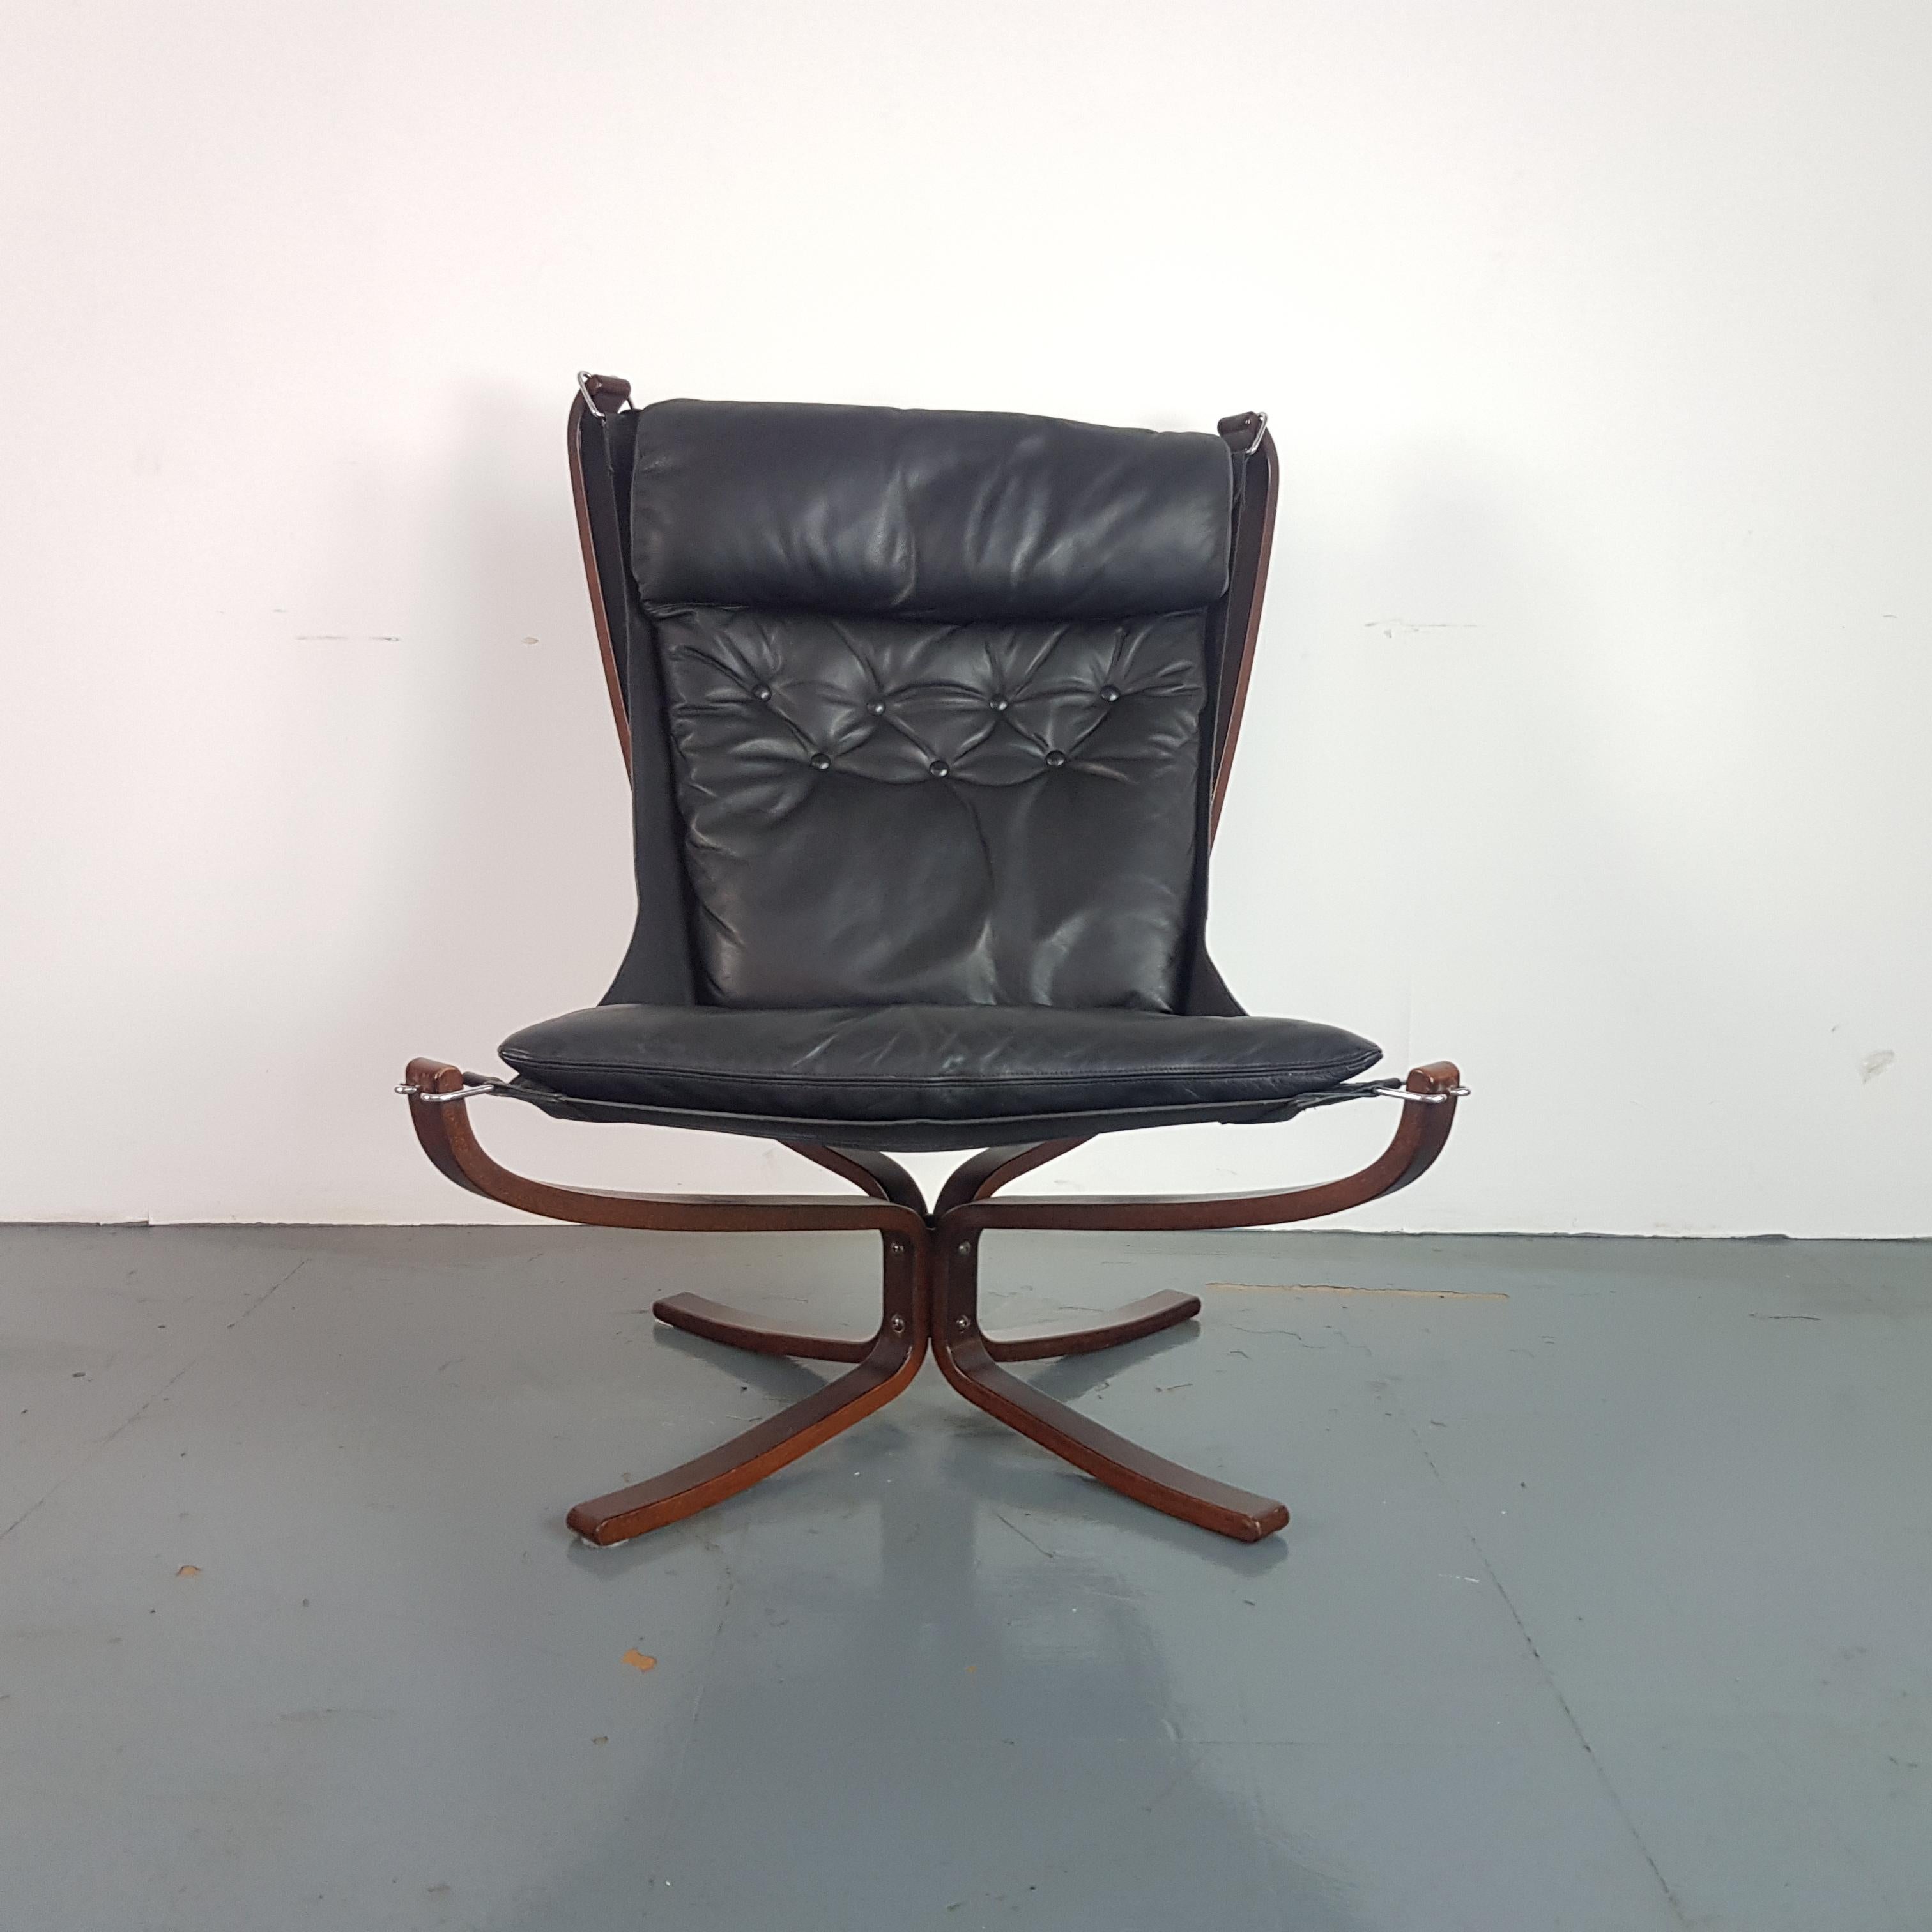 Vintage 1970s High Back Black Leather Falcon Chair Designed by Sigurd Resell 1